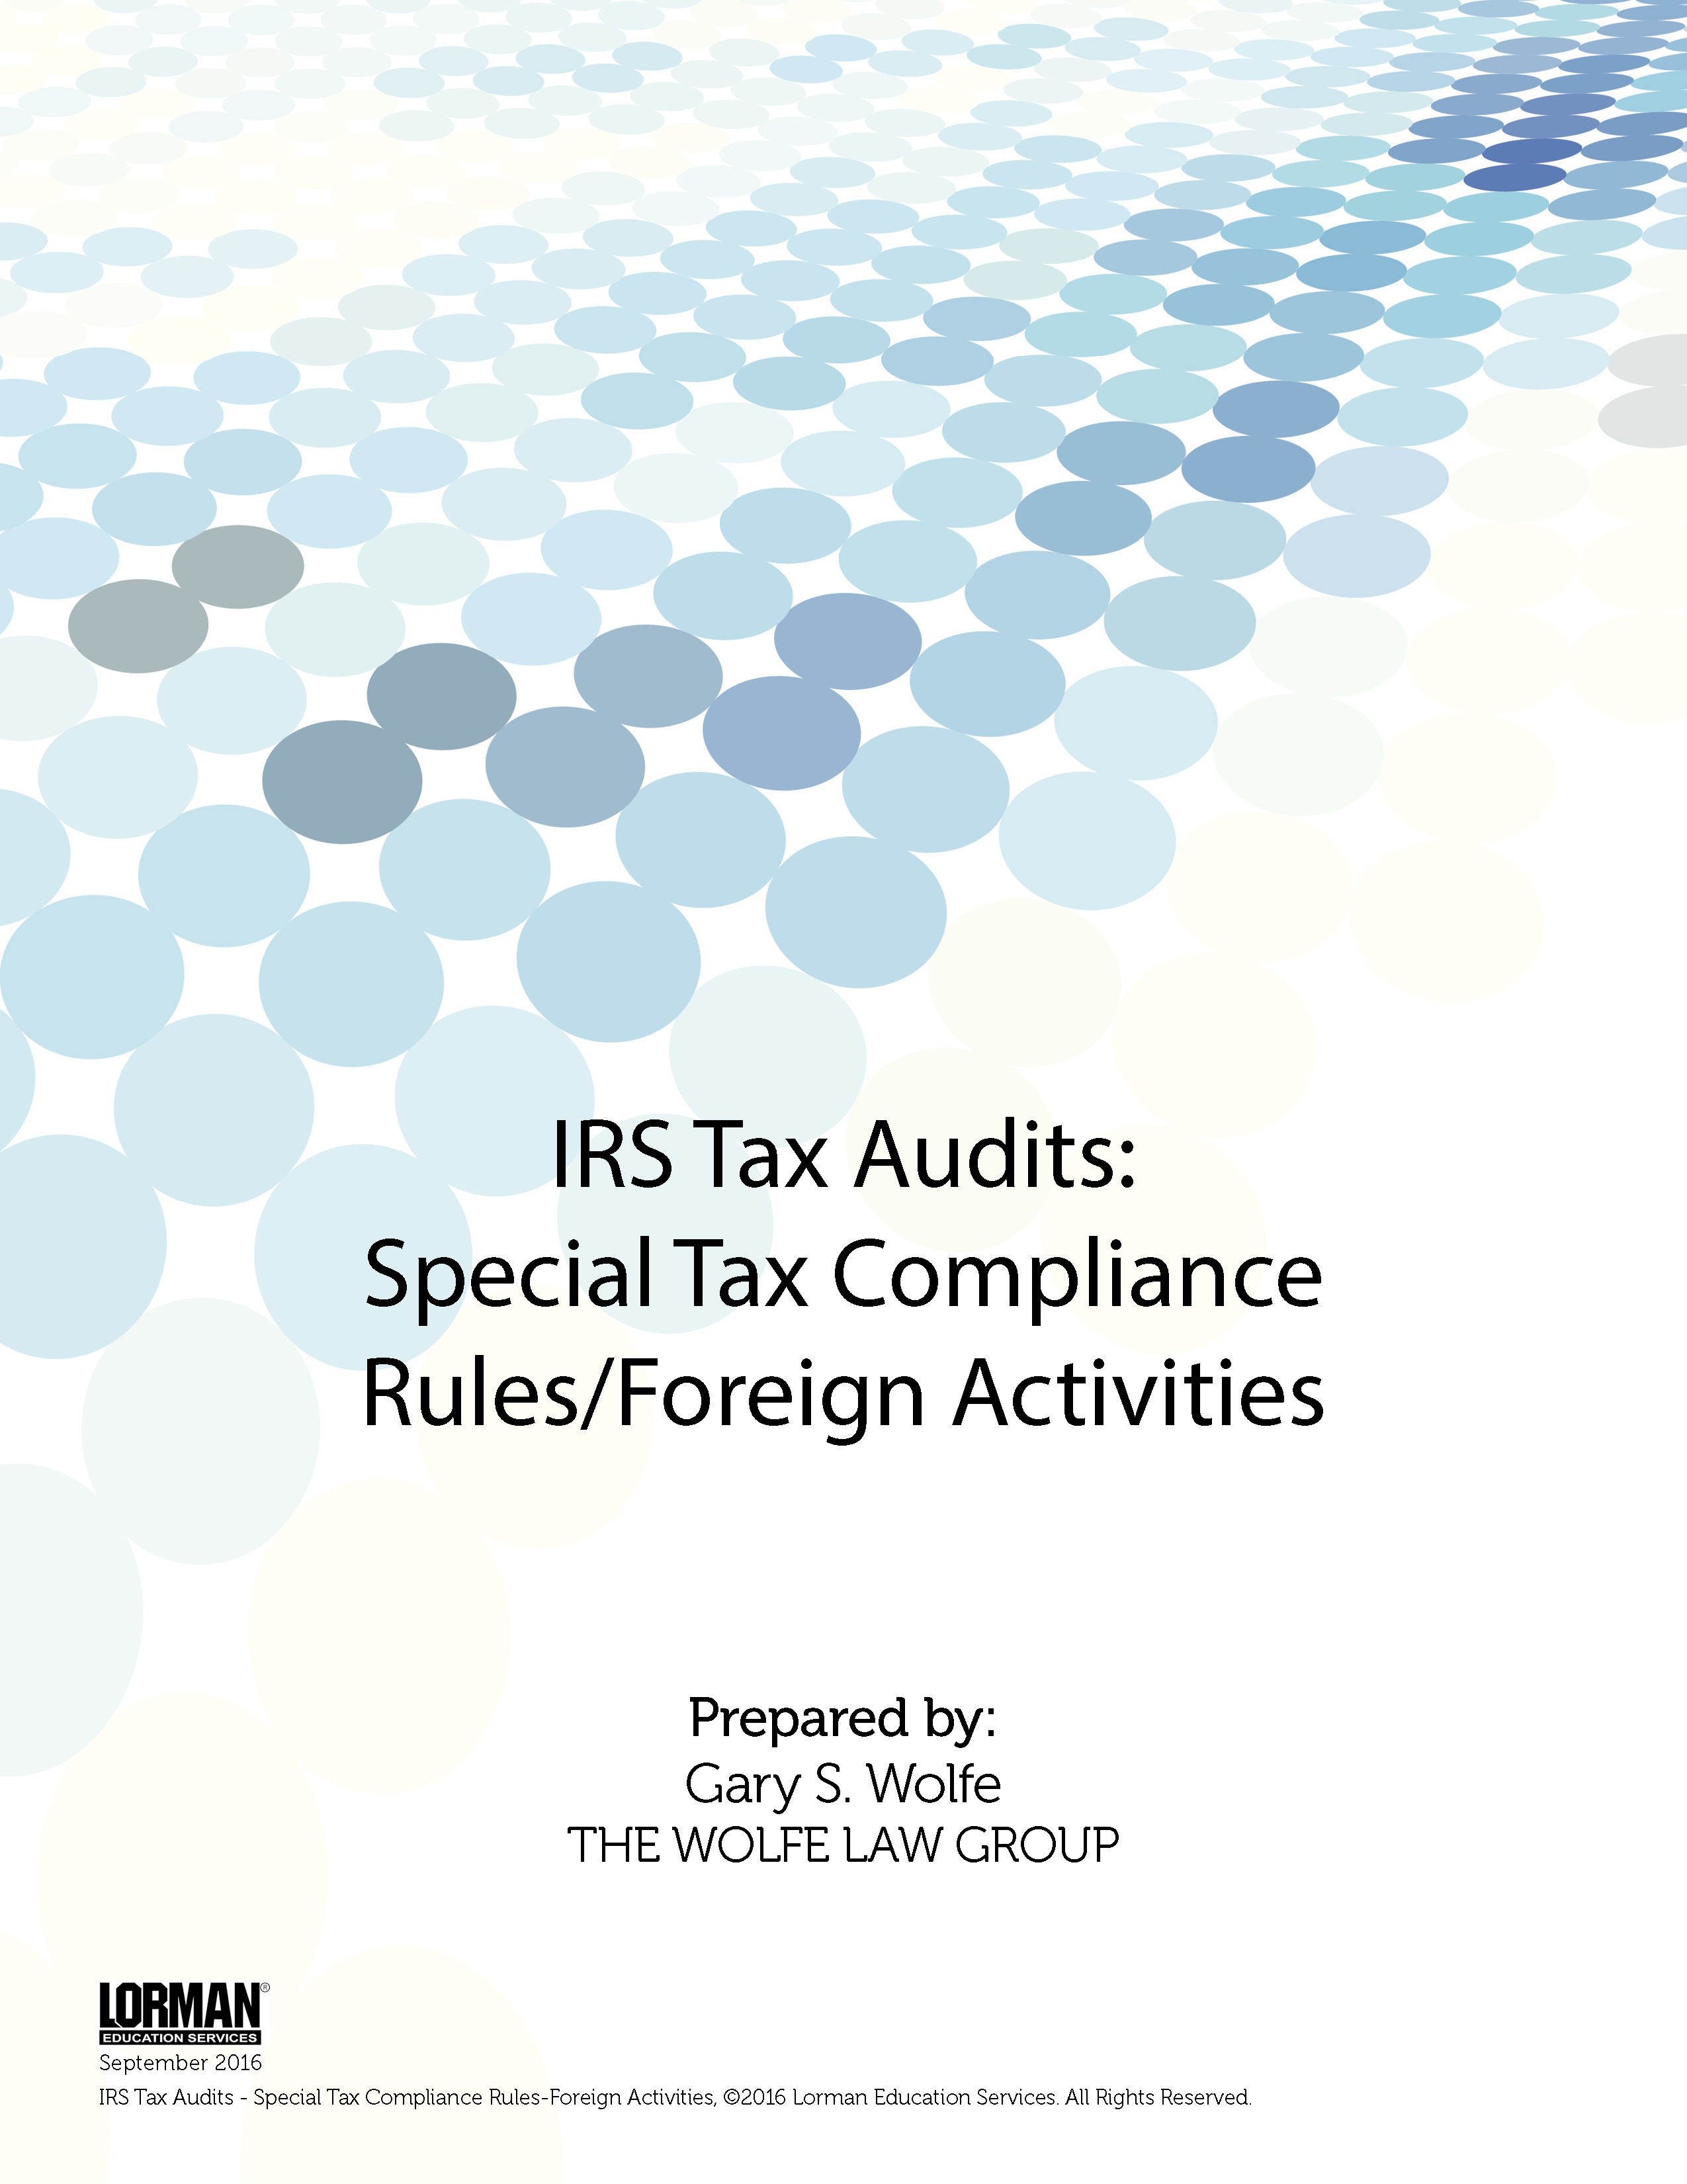 IRS Tax Audits: Special Tax Compliance Rules/Foreign Activities